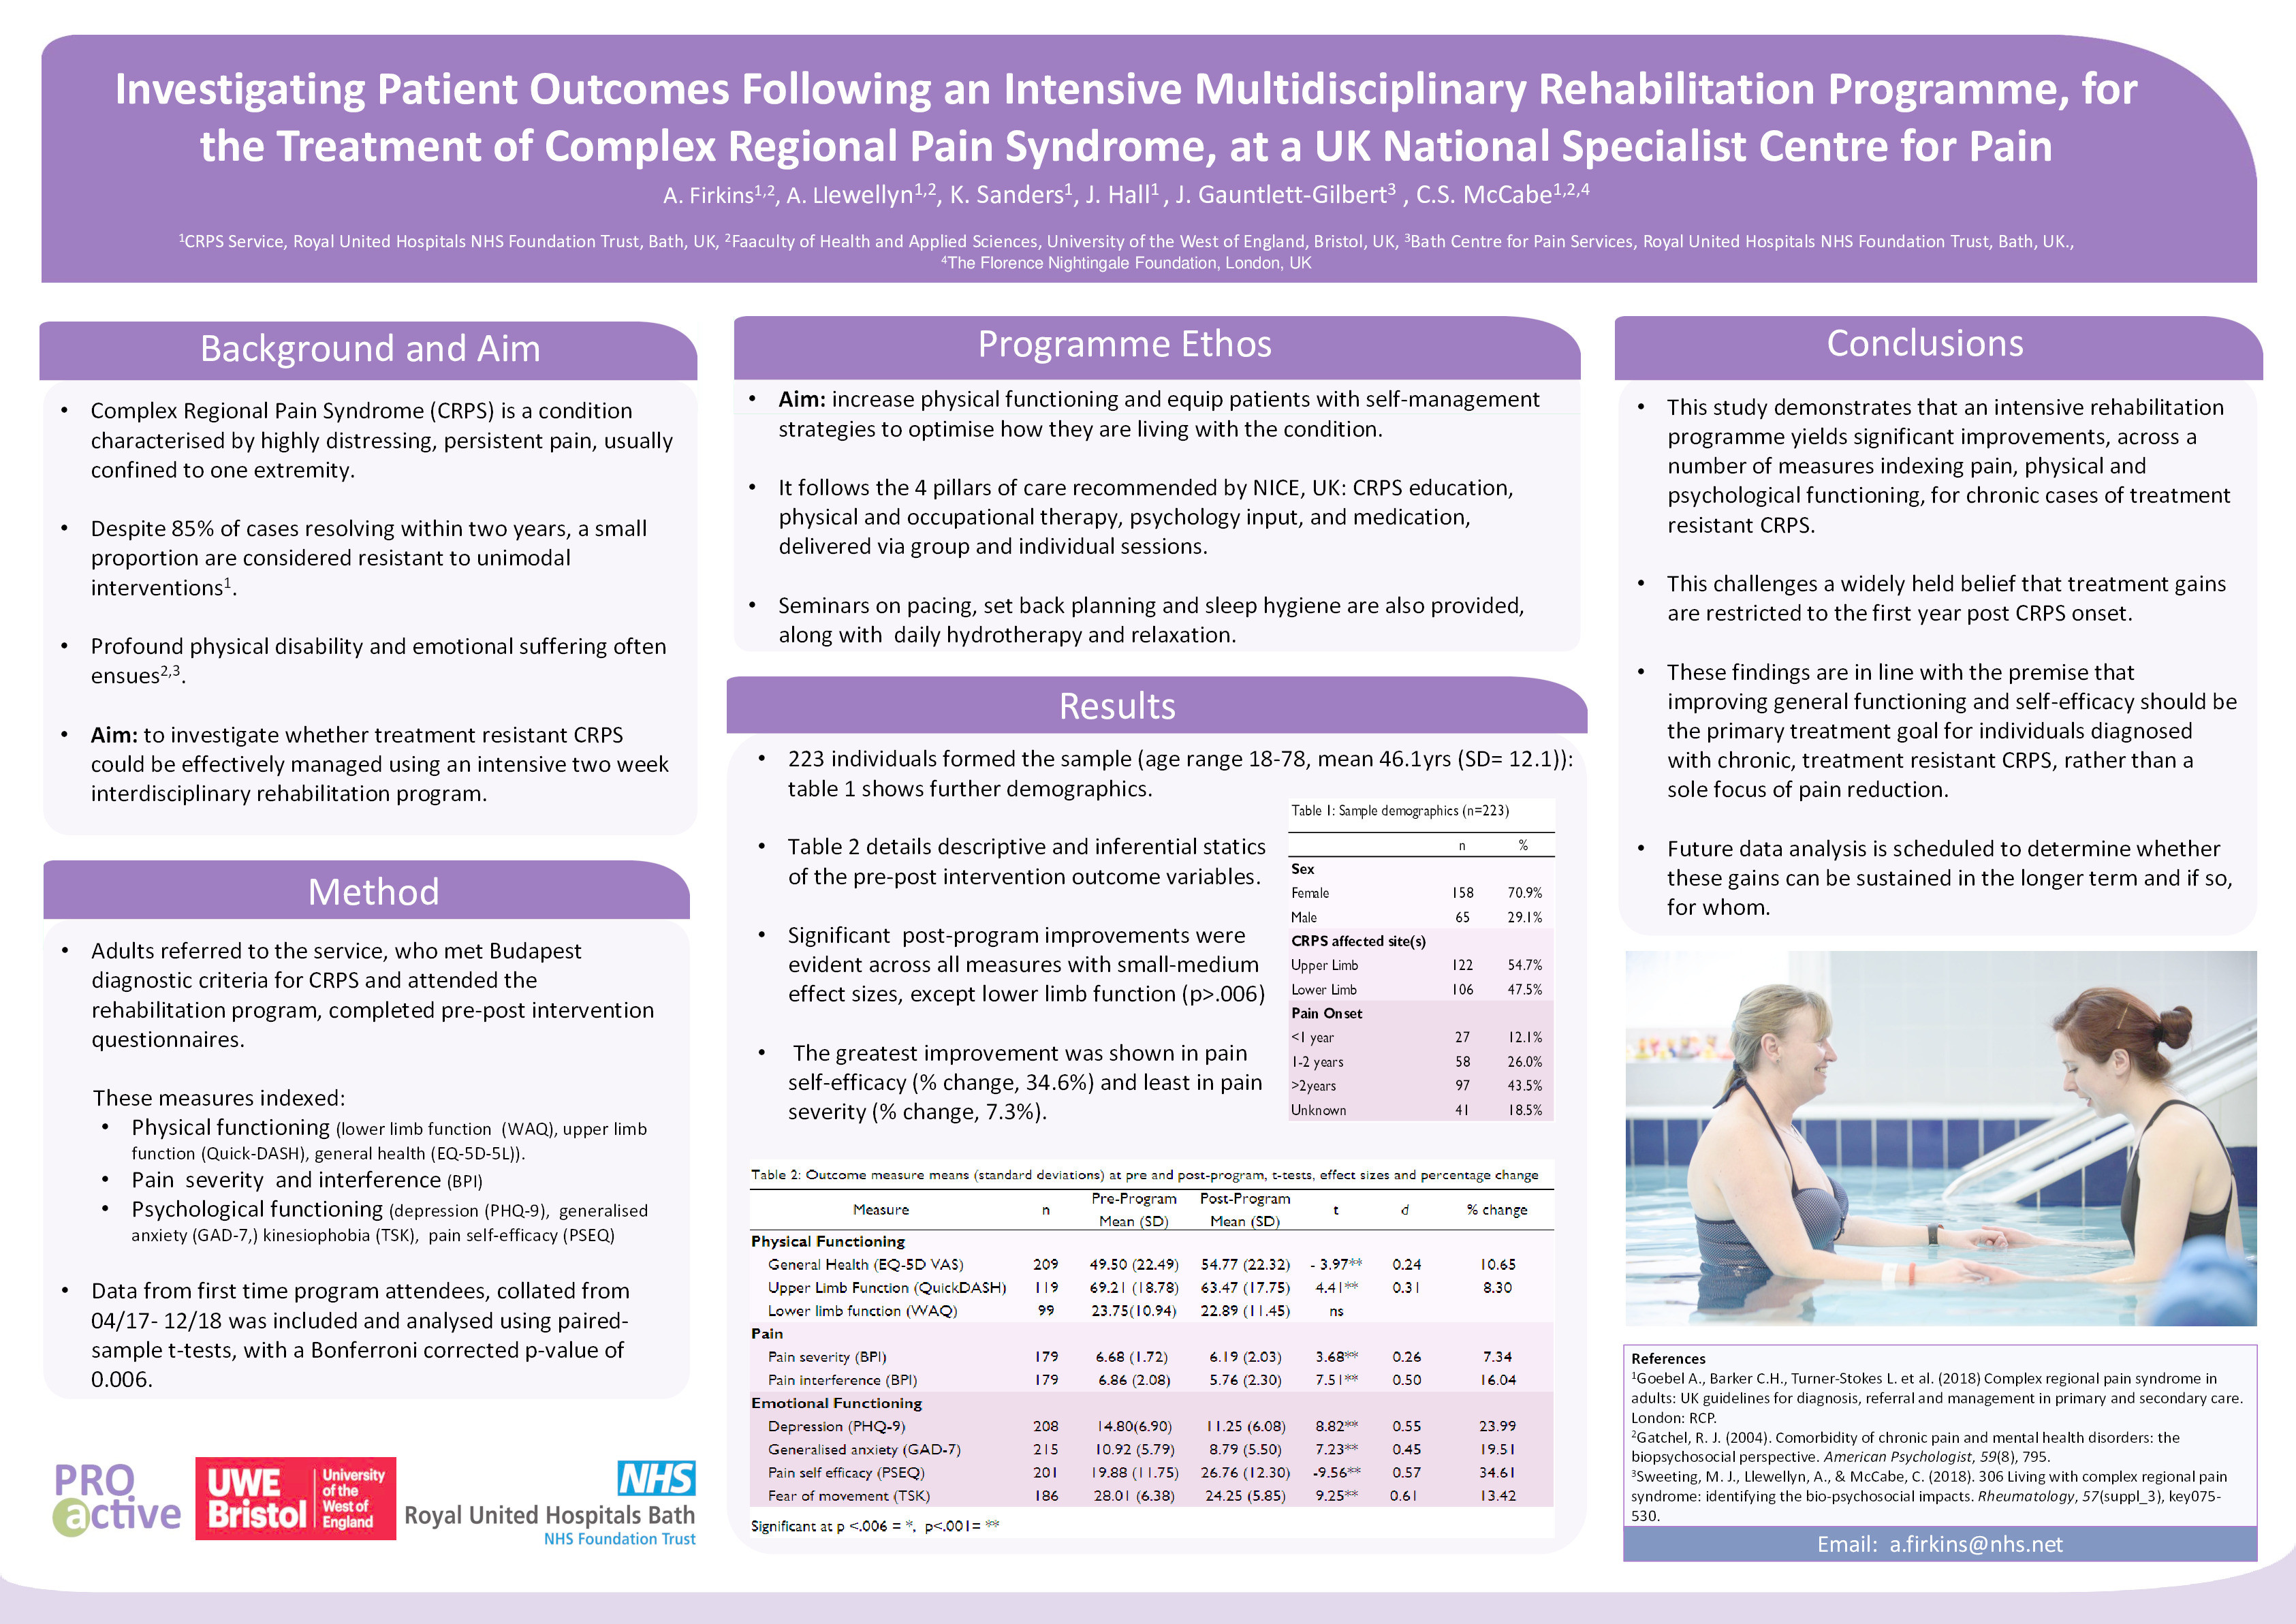 Investigating patient outcomes following an intensive multidisciplinary rehabilitation programme, for the treatment of Complex Regional Pain Syndrome (CRPS) at a UK National specialist centre for pain Thumbnail